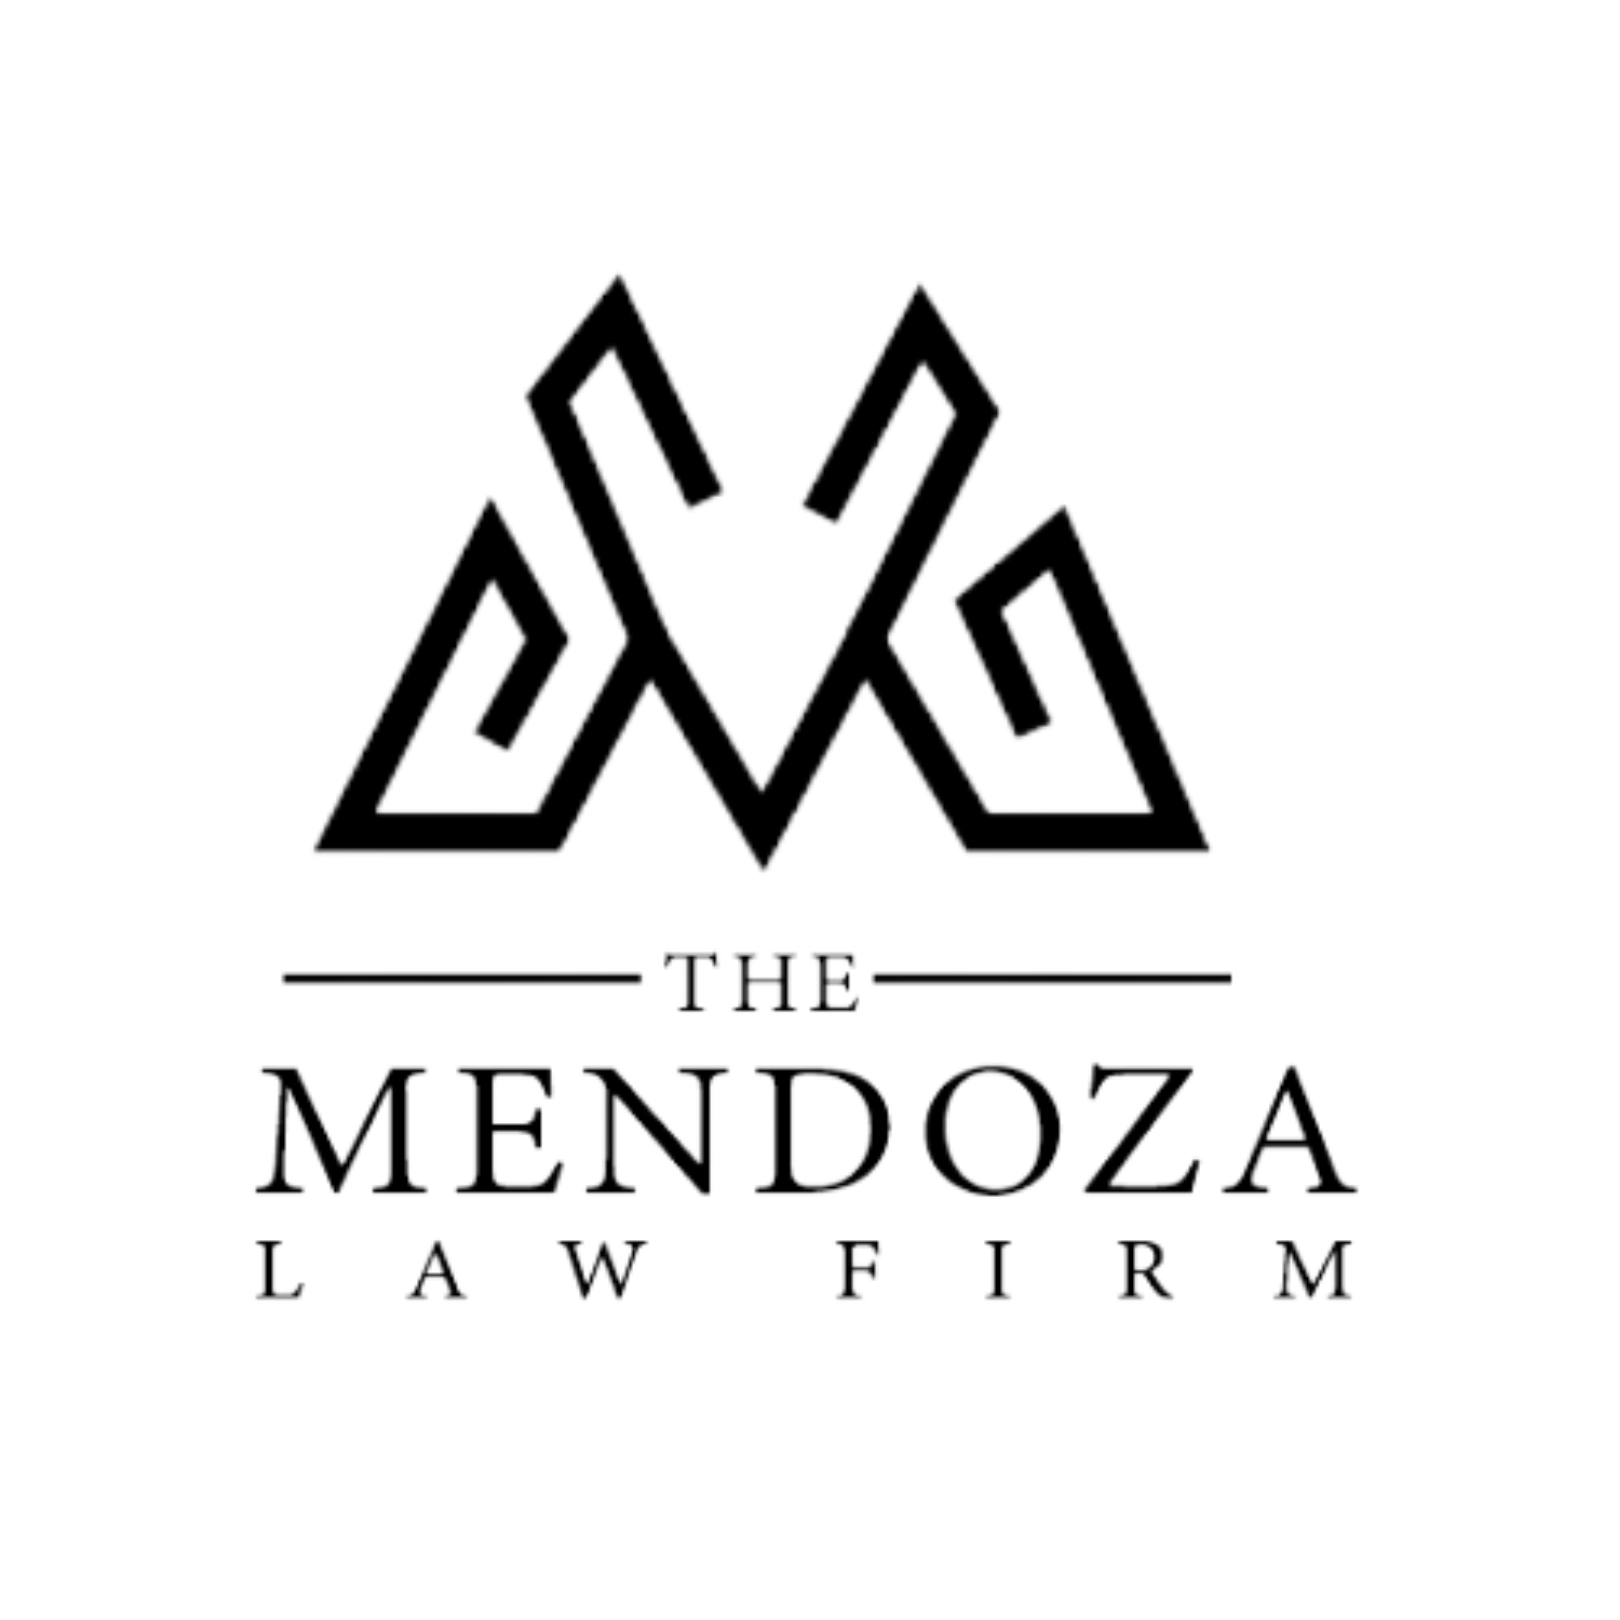 Business logo of The Mendoza Law Firm, LLC